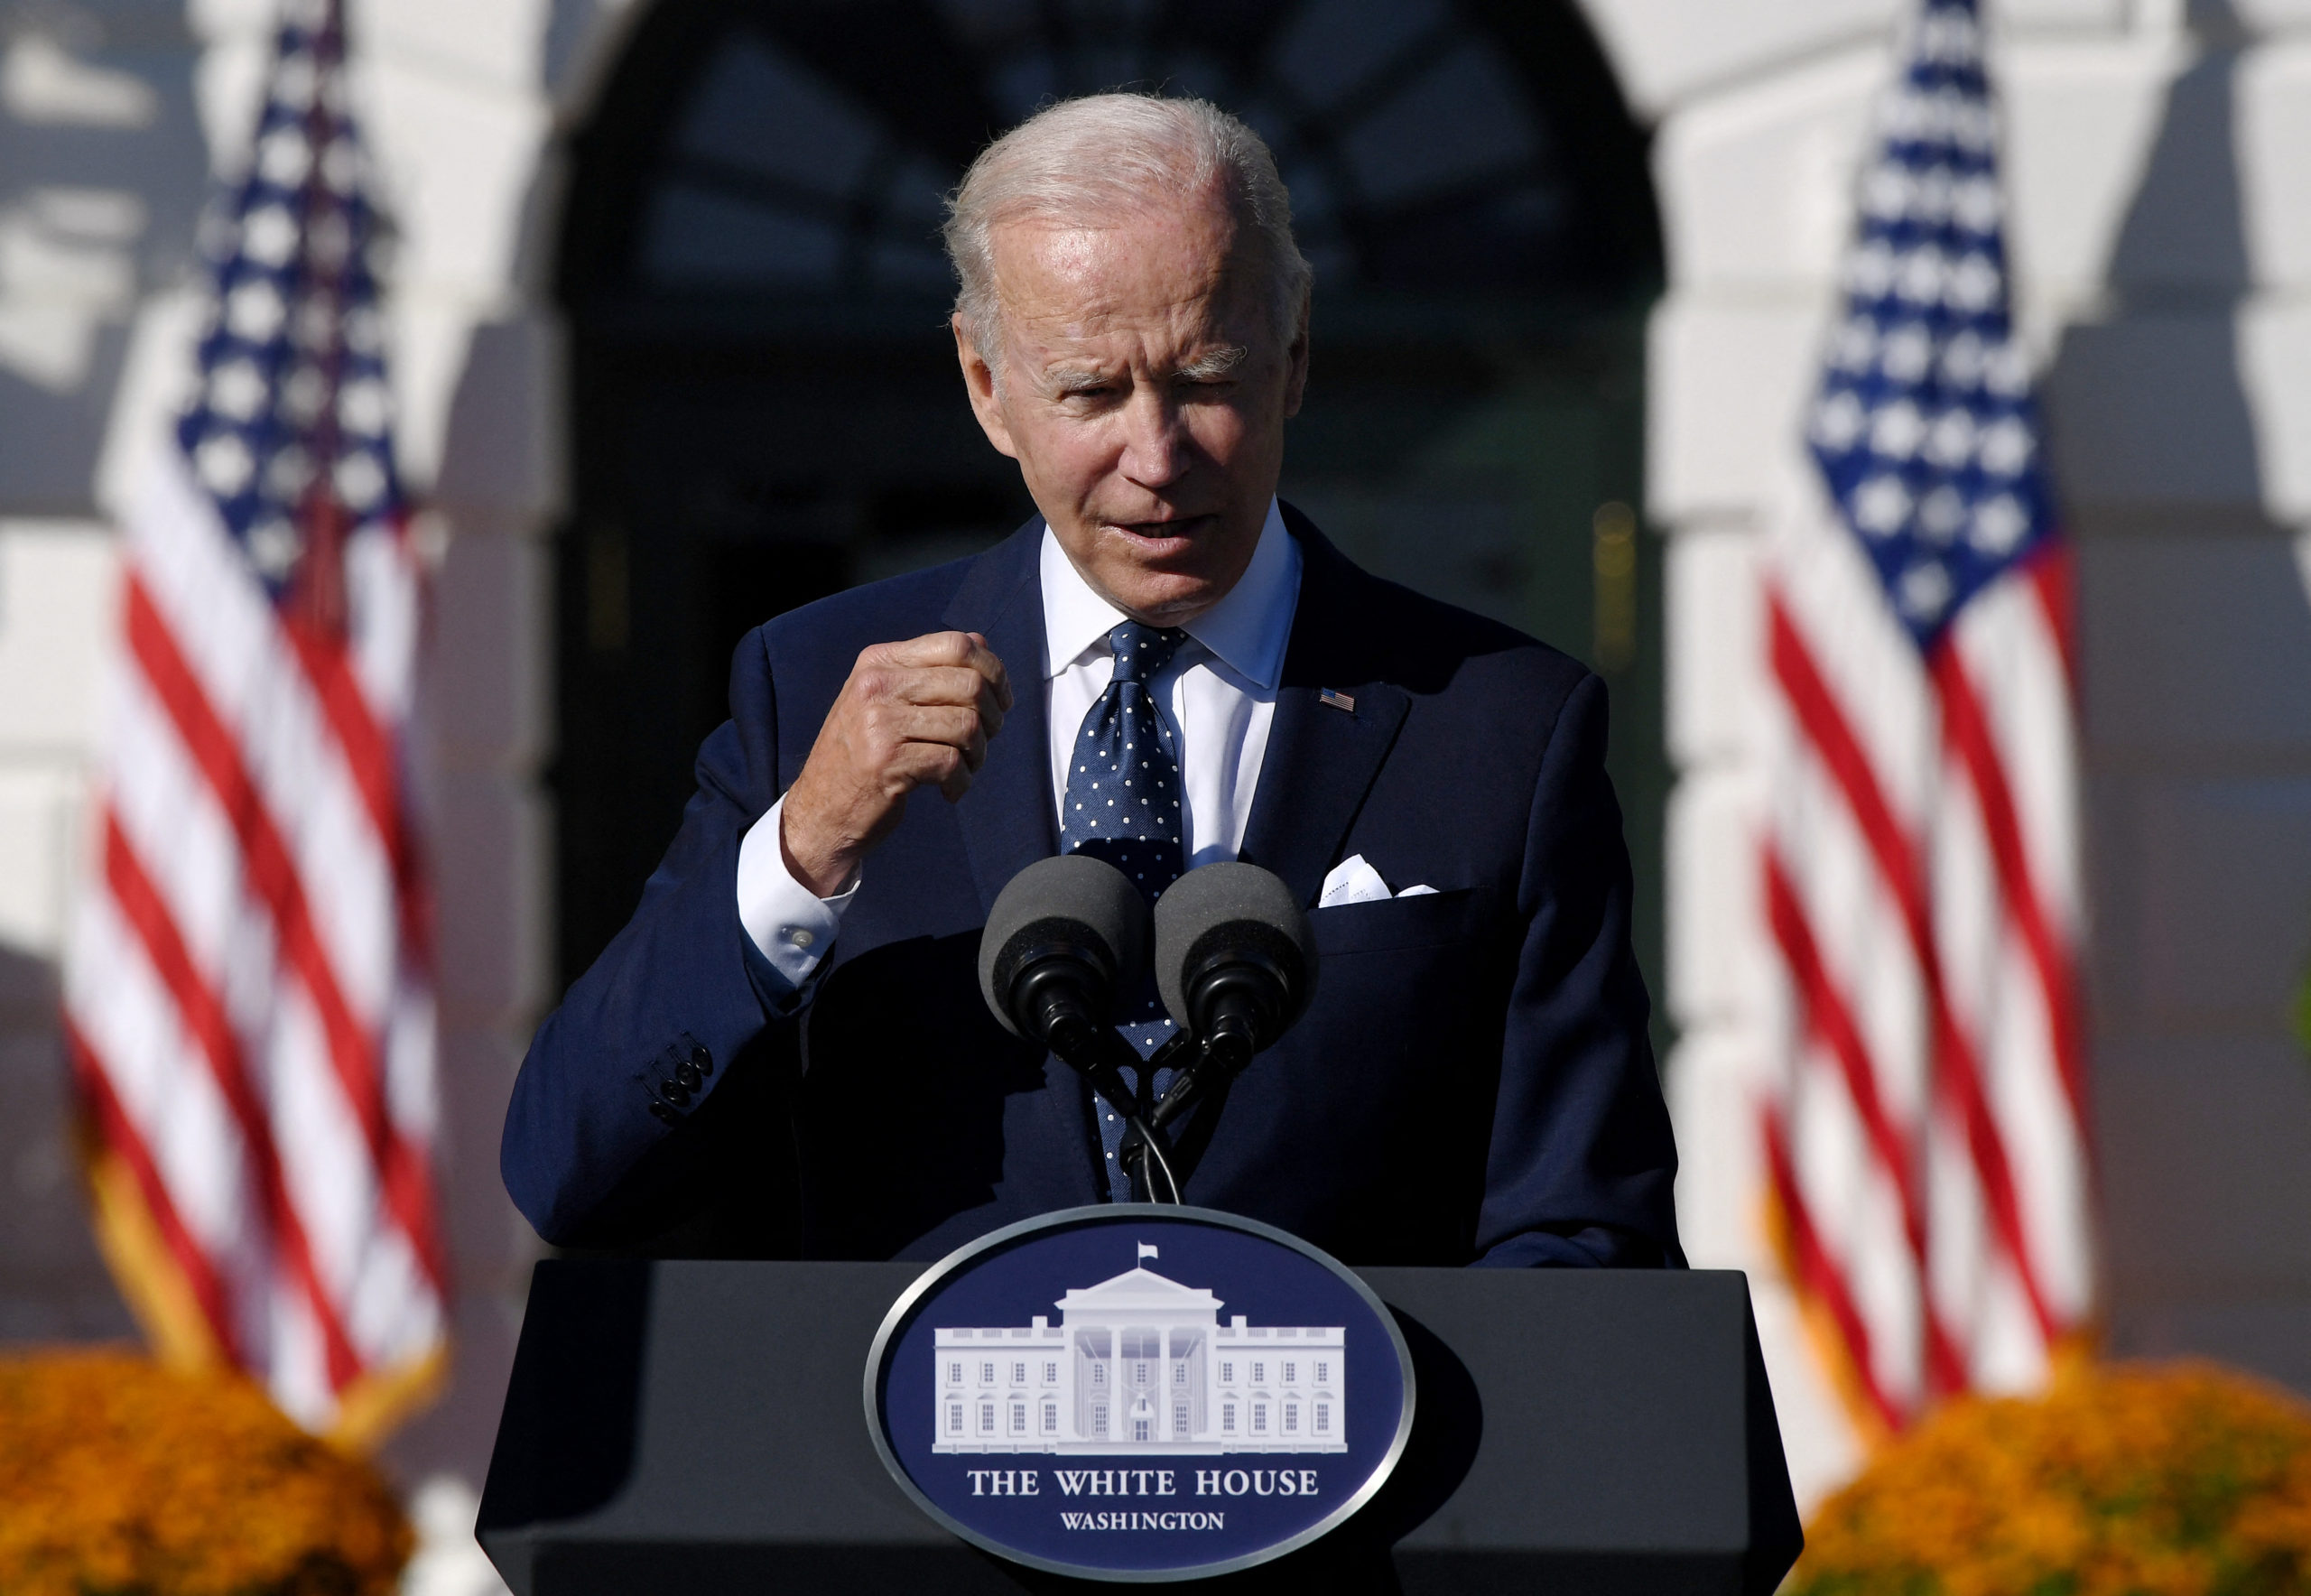 US President Joe Biden speaks during an event honoring the Council of Chief State School Officers' 2020 and 2021 State and National Teachers of the Year on the South Lawn of the White House in Washington, DC on October 18, 2021. (Photo by Olivier DOULIERY / AFP) (Photo by OLIVIER DOULIERY/AFP via Getty Images)